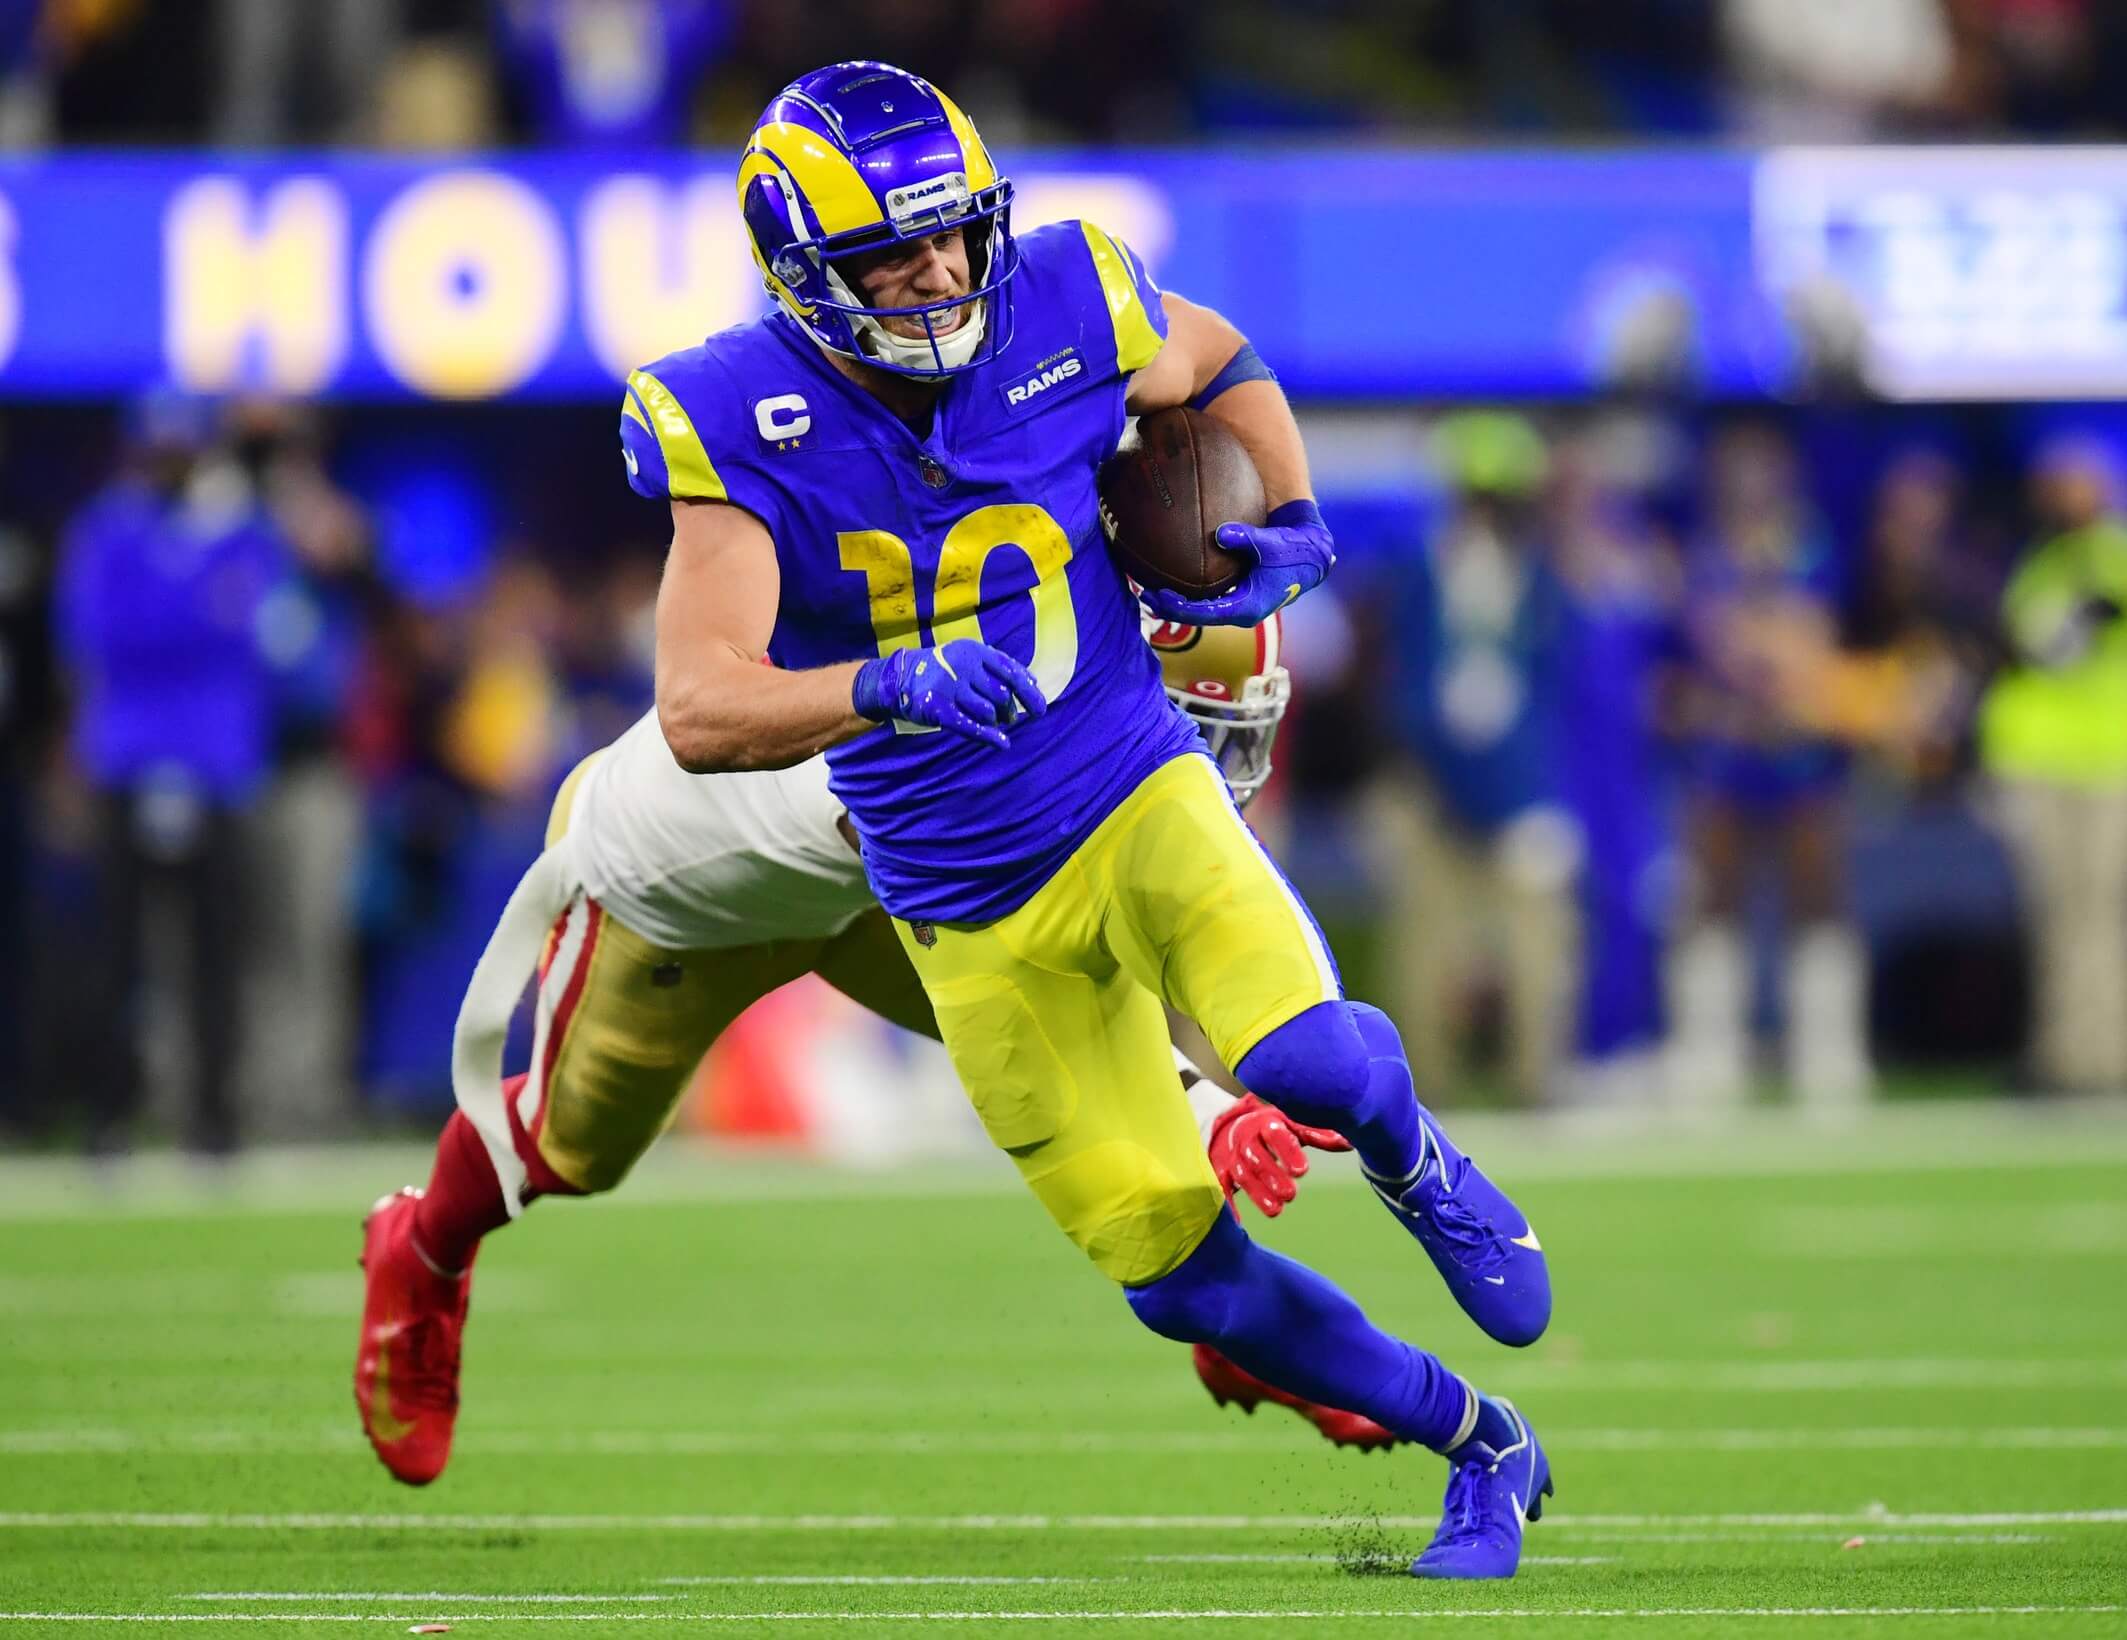 os Angeles Rams wide receiver Cooper Kupp (10) runs past San Francisco 49ers cornerback Emmanuel Moseley (4) in the fourth quarter during the NFC Championship Game at SoFi Stadium.